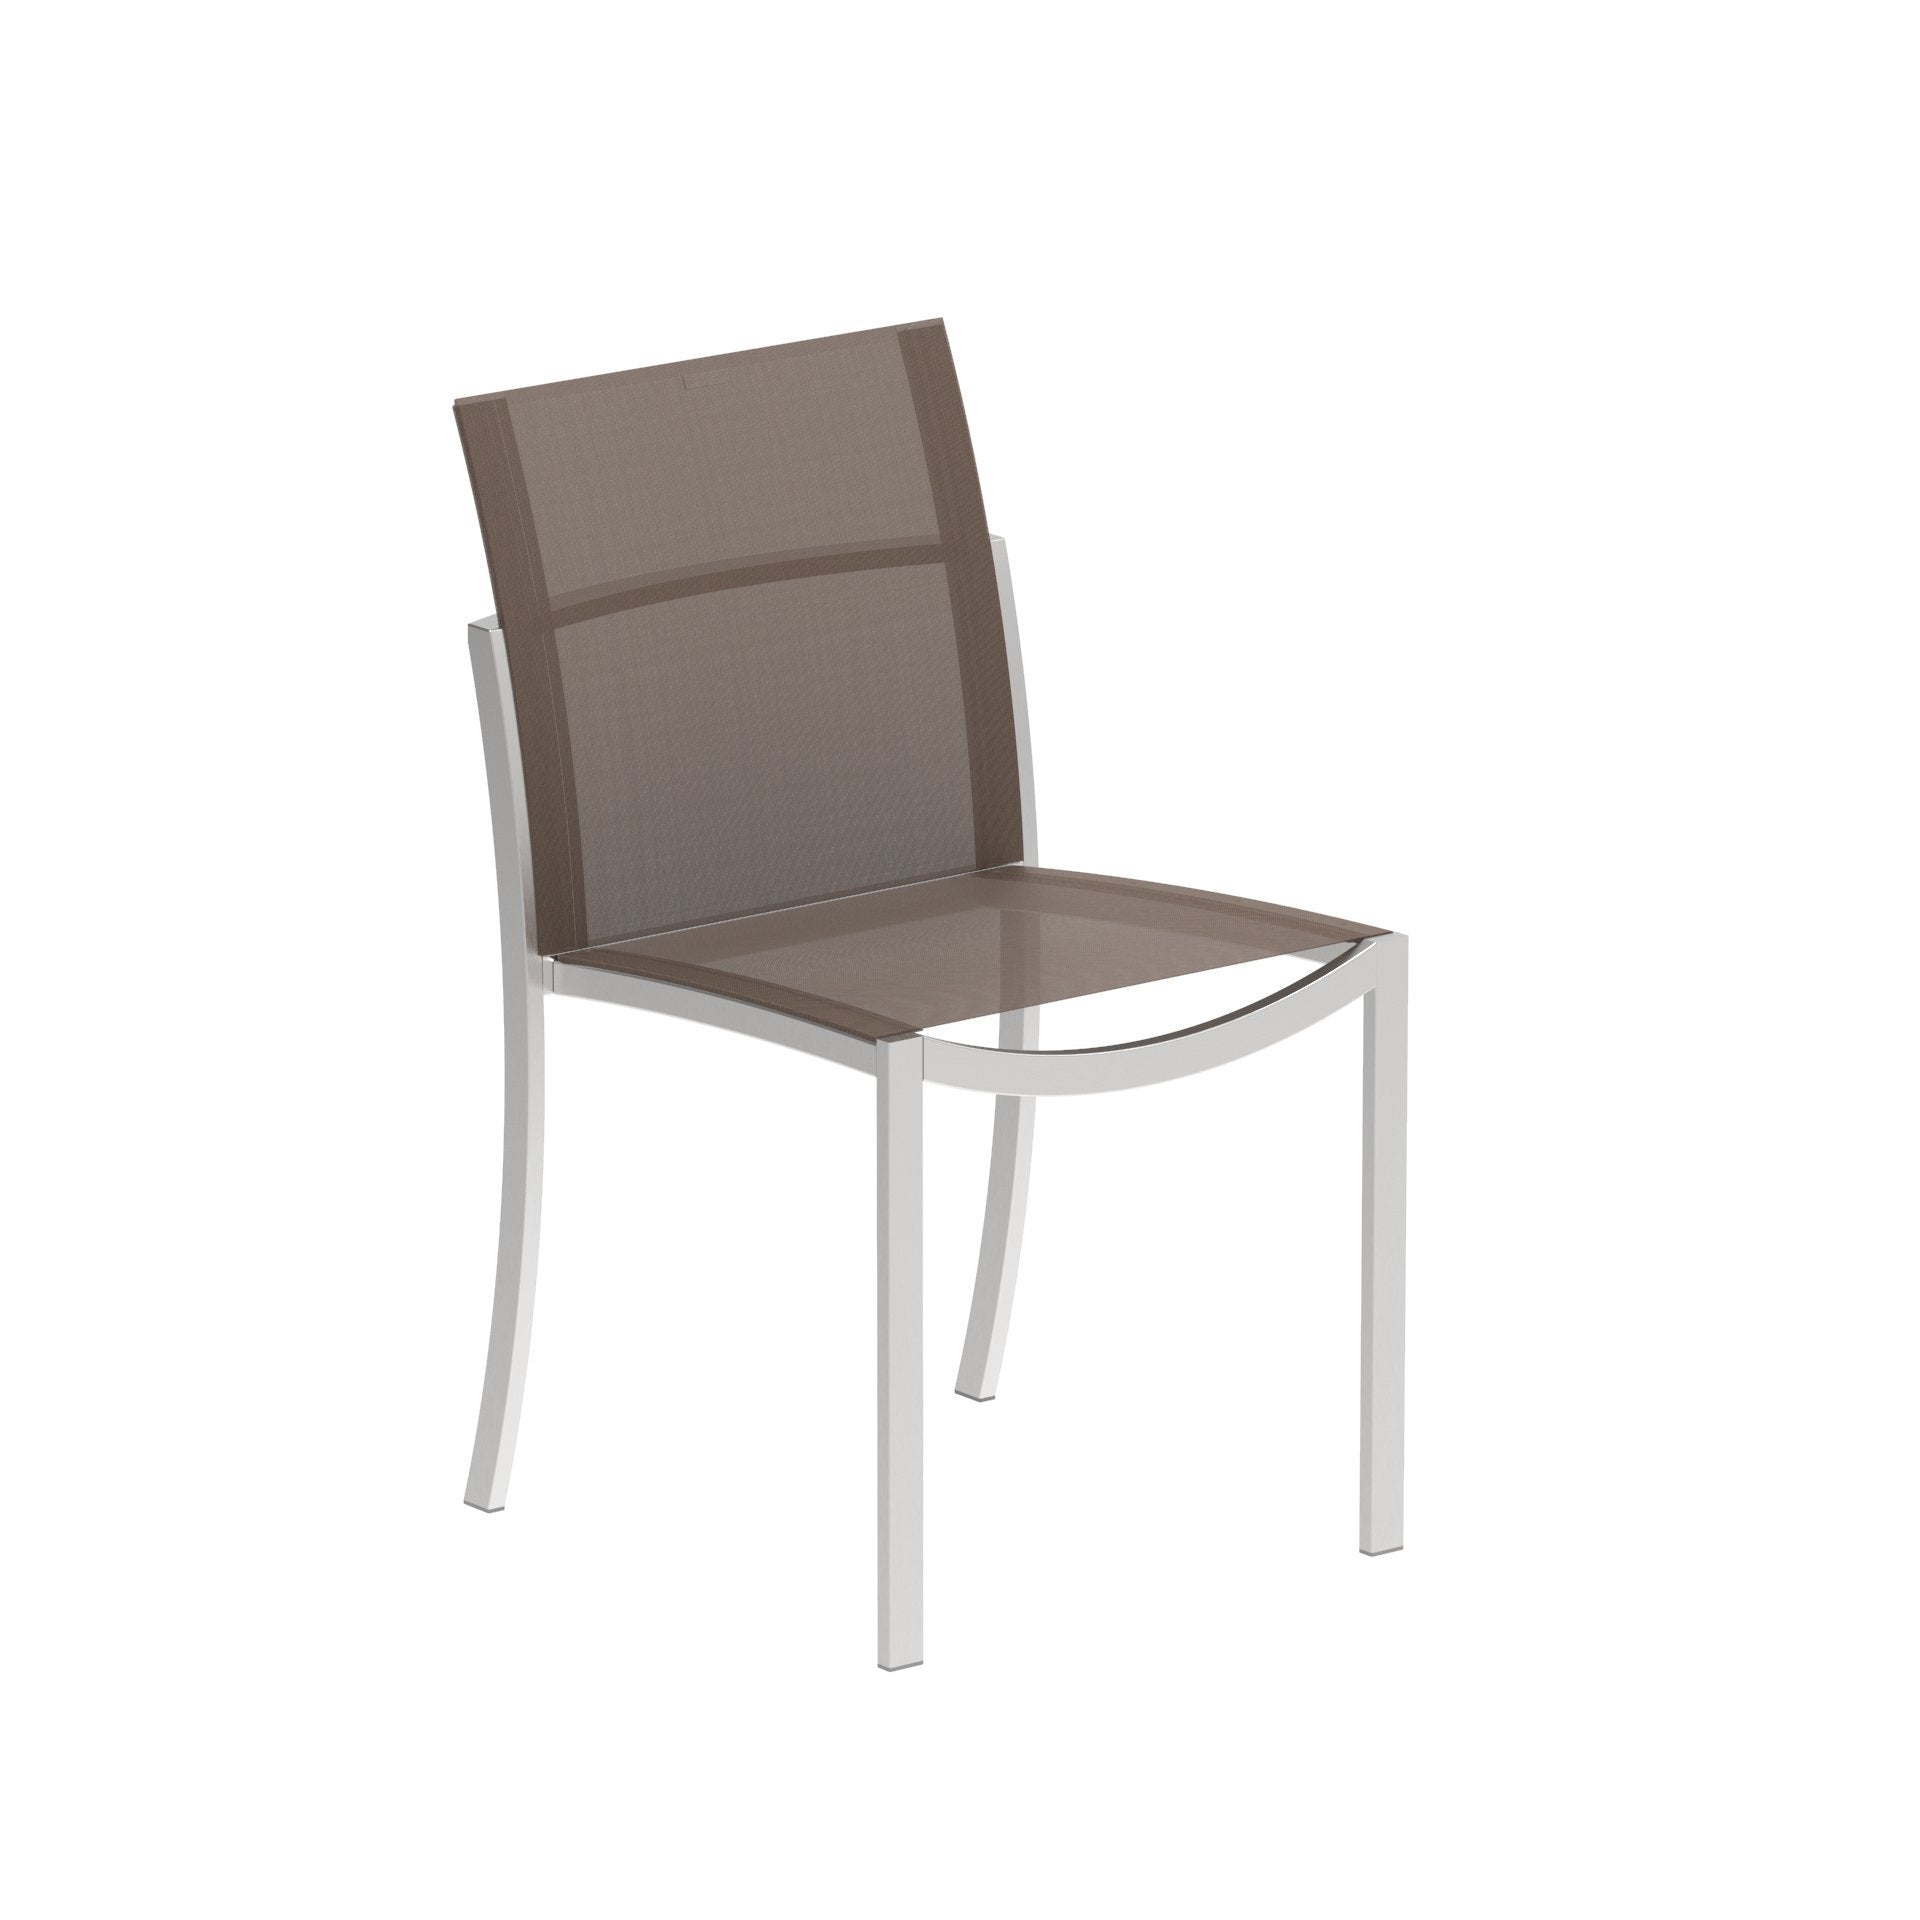 O-Zon 47 Dining Chair